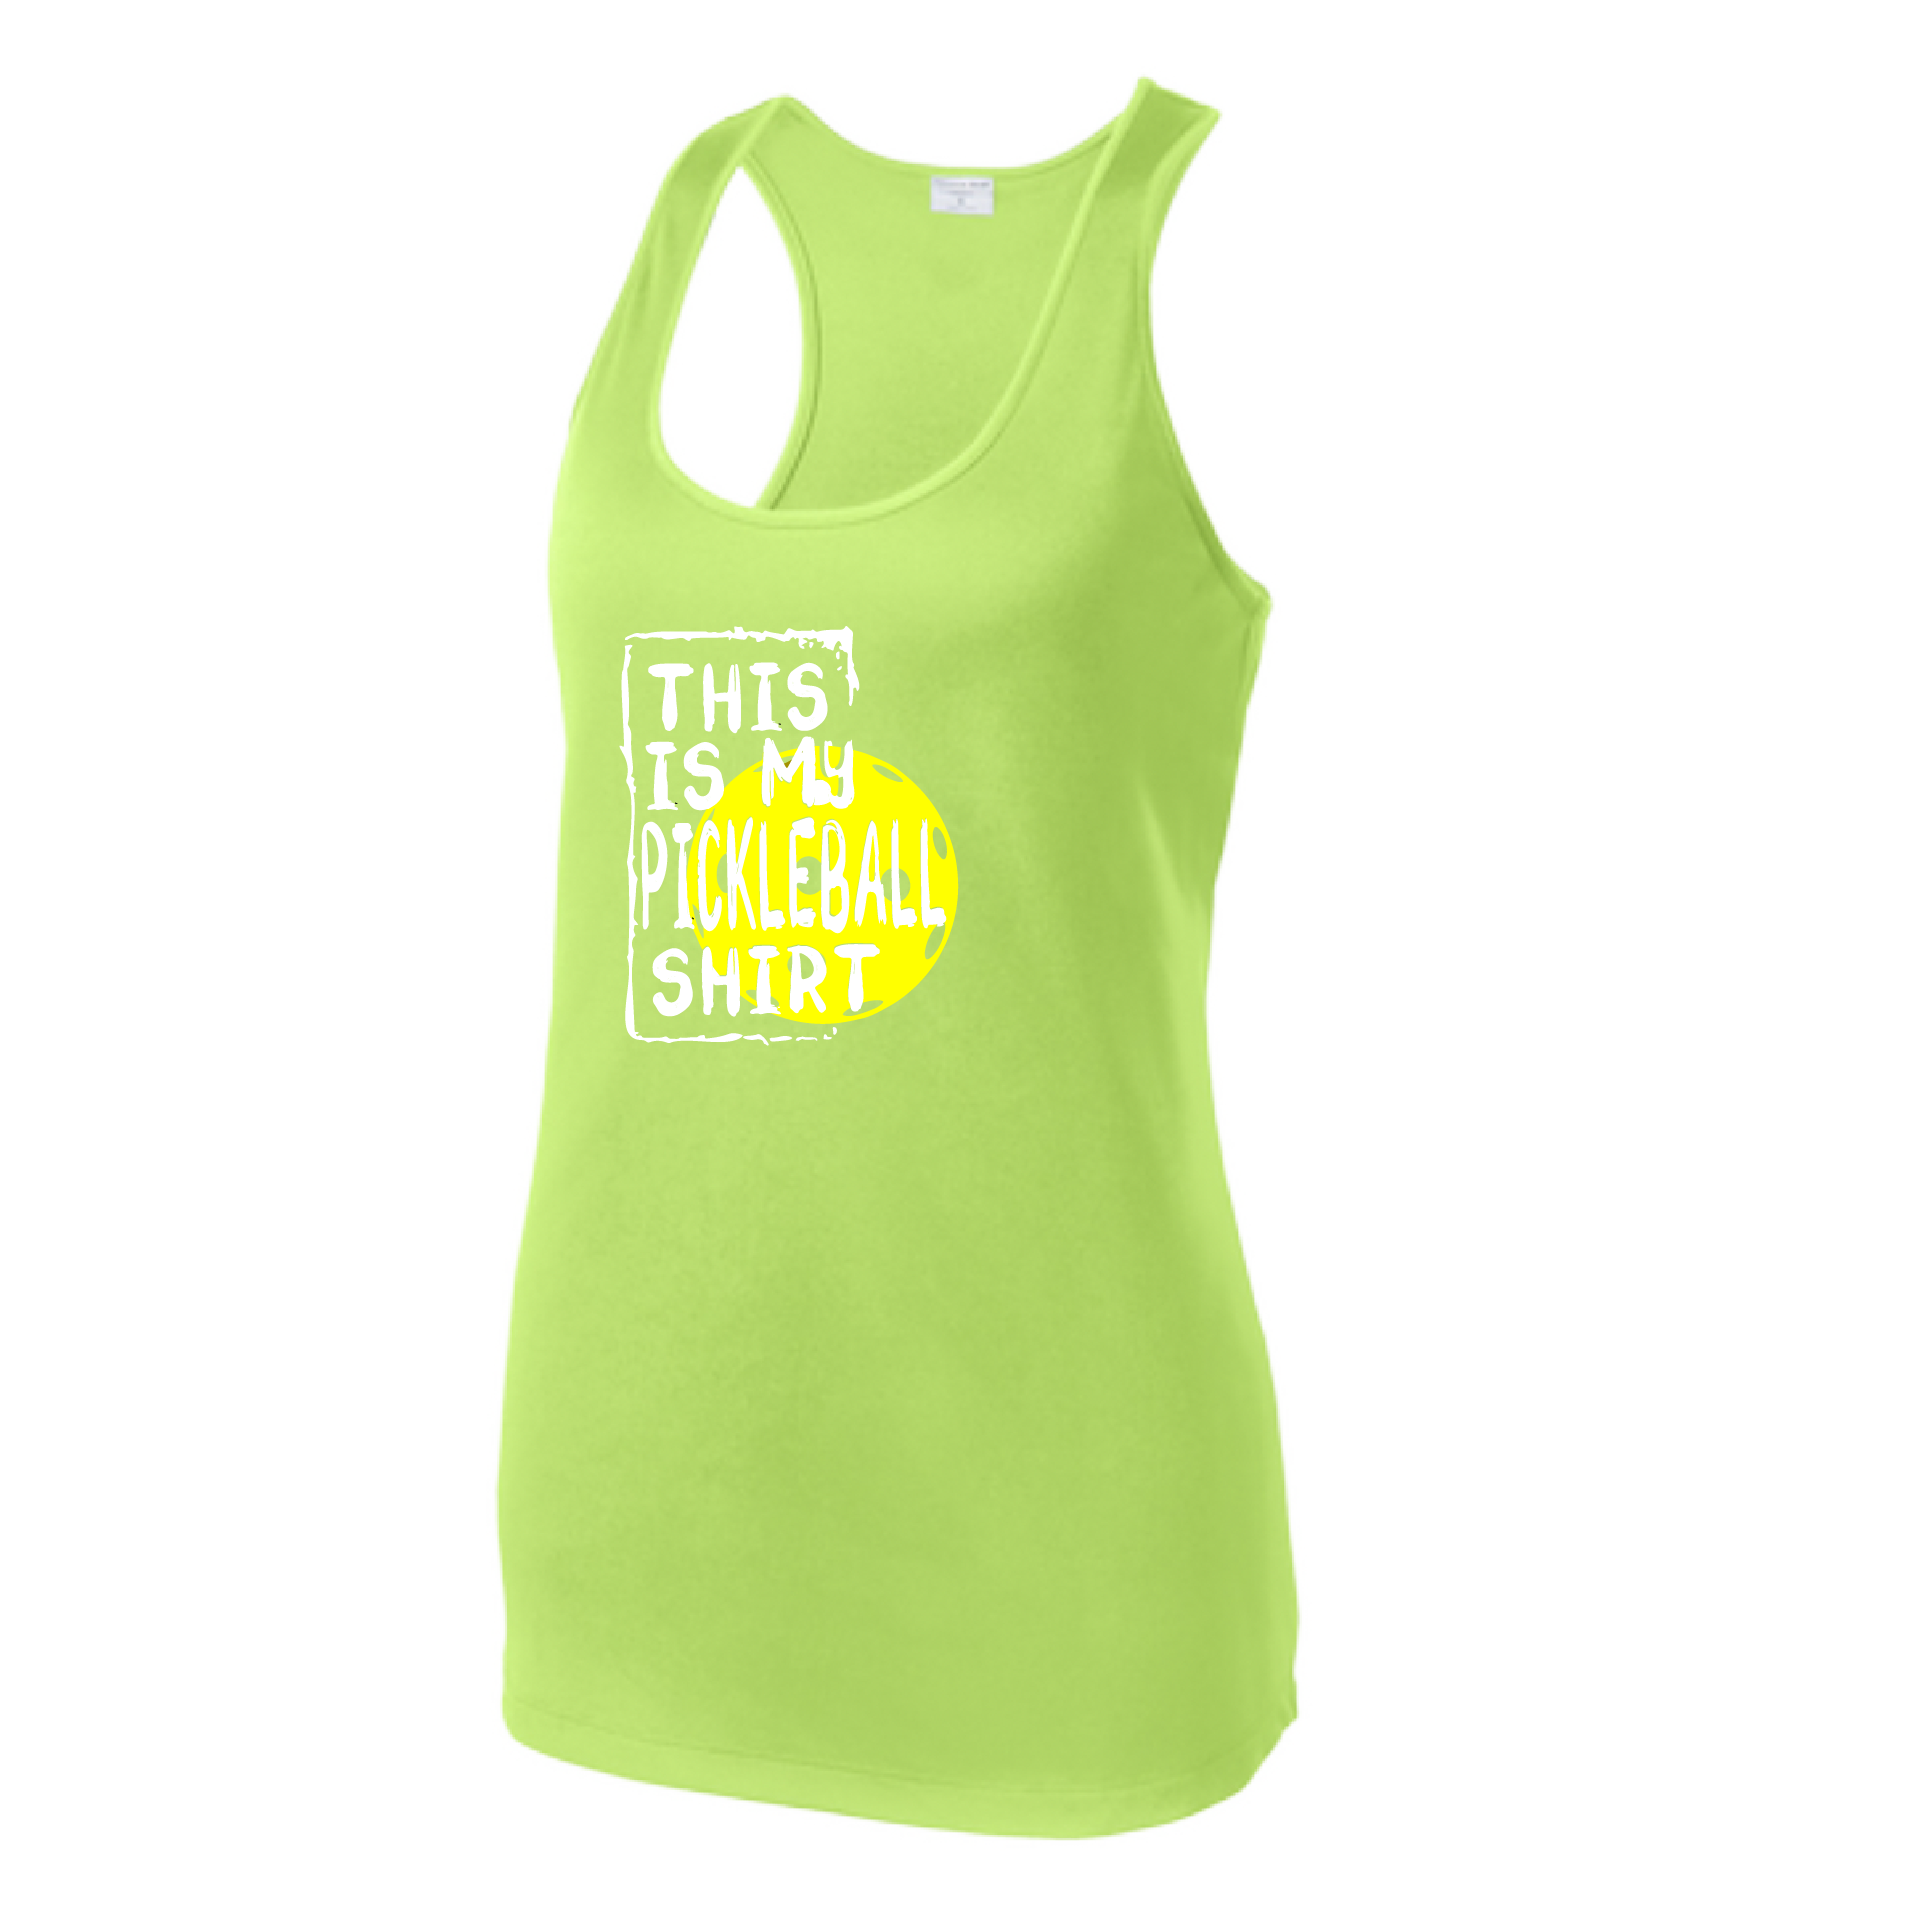 Pickleball Design: This is my Pickleball Shirt  Women's Style: Racerback Tank  Turn up the volume in this Women's shirt with its perfect mix of softness and attitude. Material is ultra-comfortable with moisture wicking properties and tri-blend softness. PosiCharge technology locks in color. Highly breathable and lightweight.